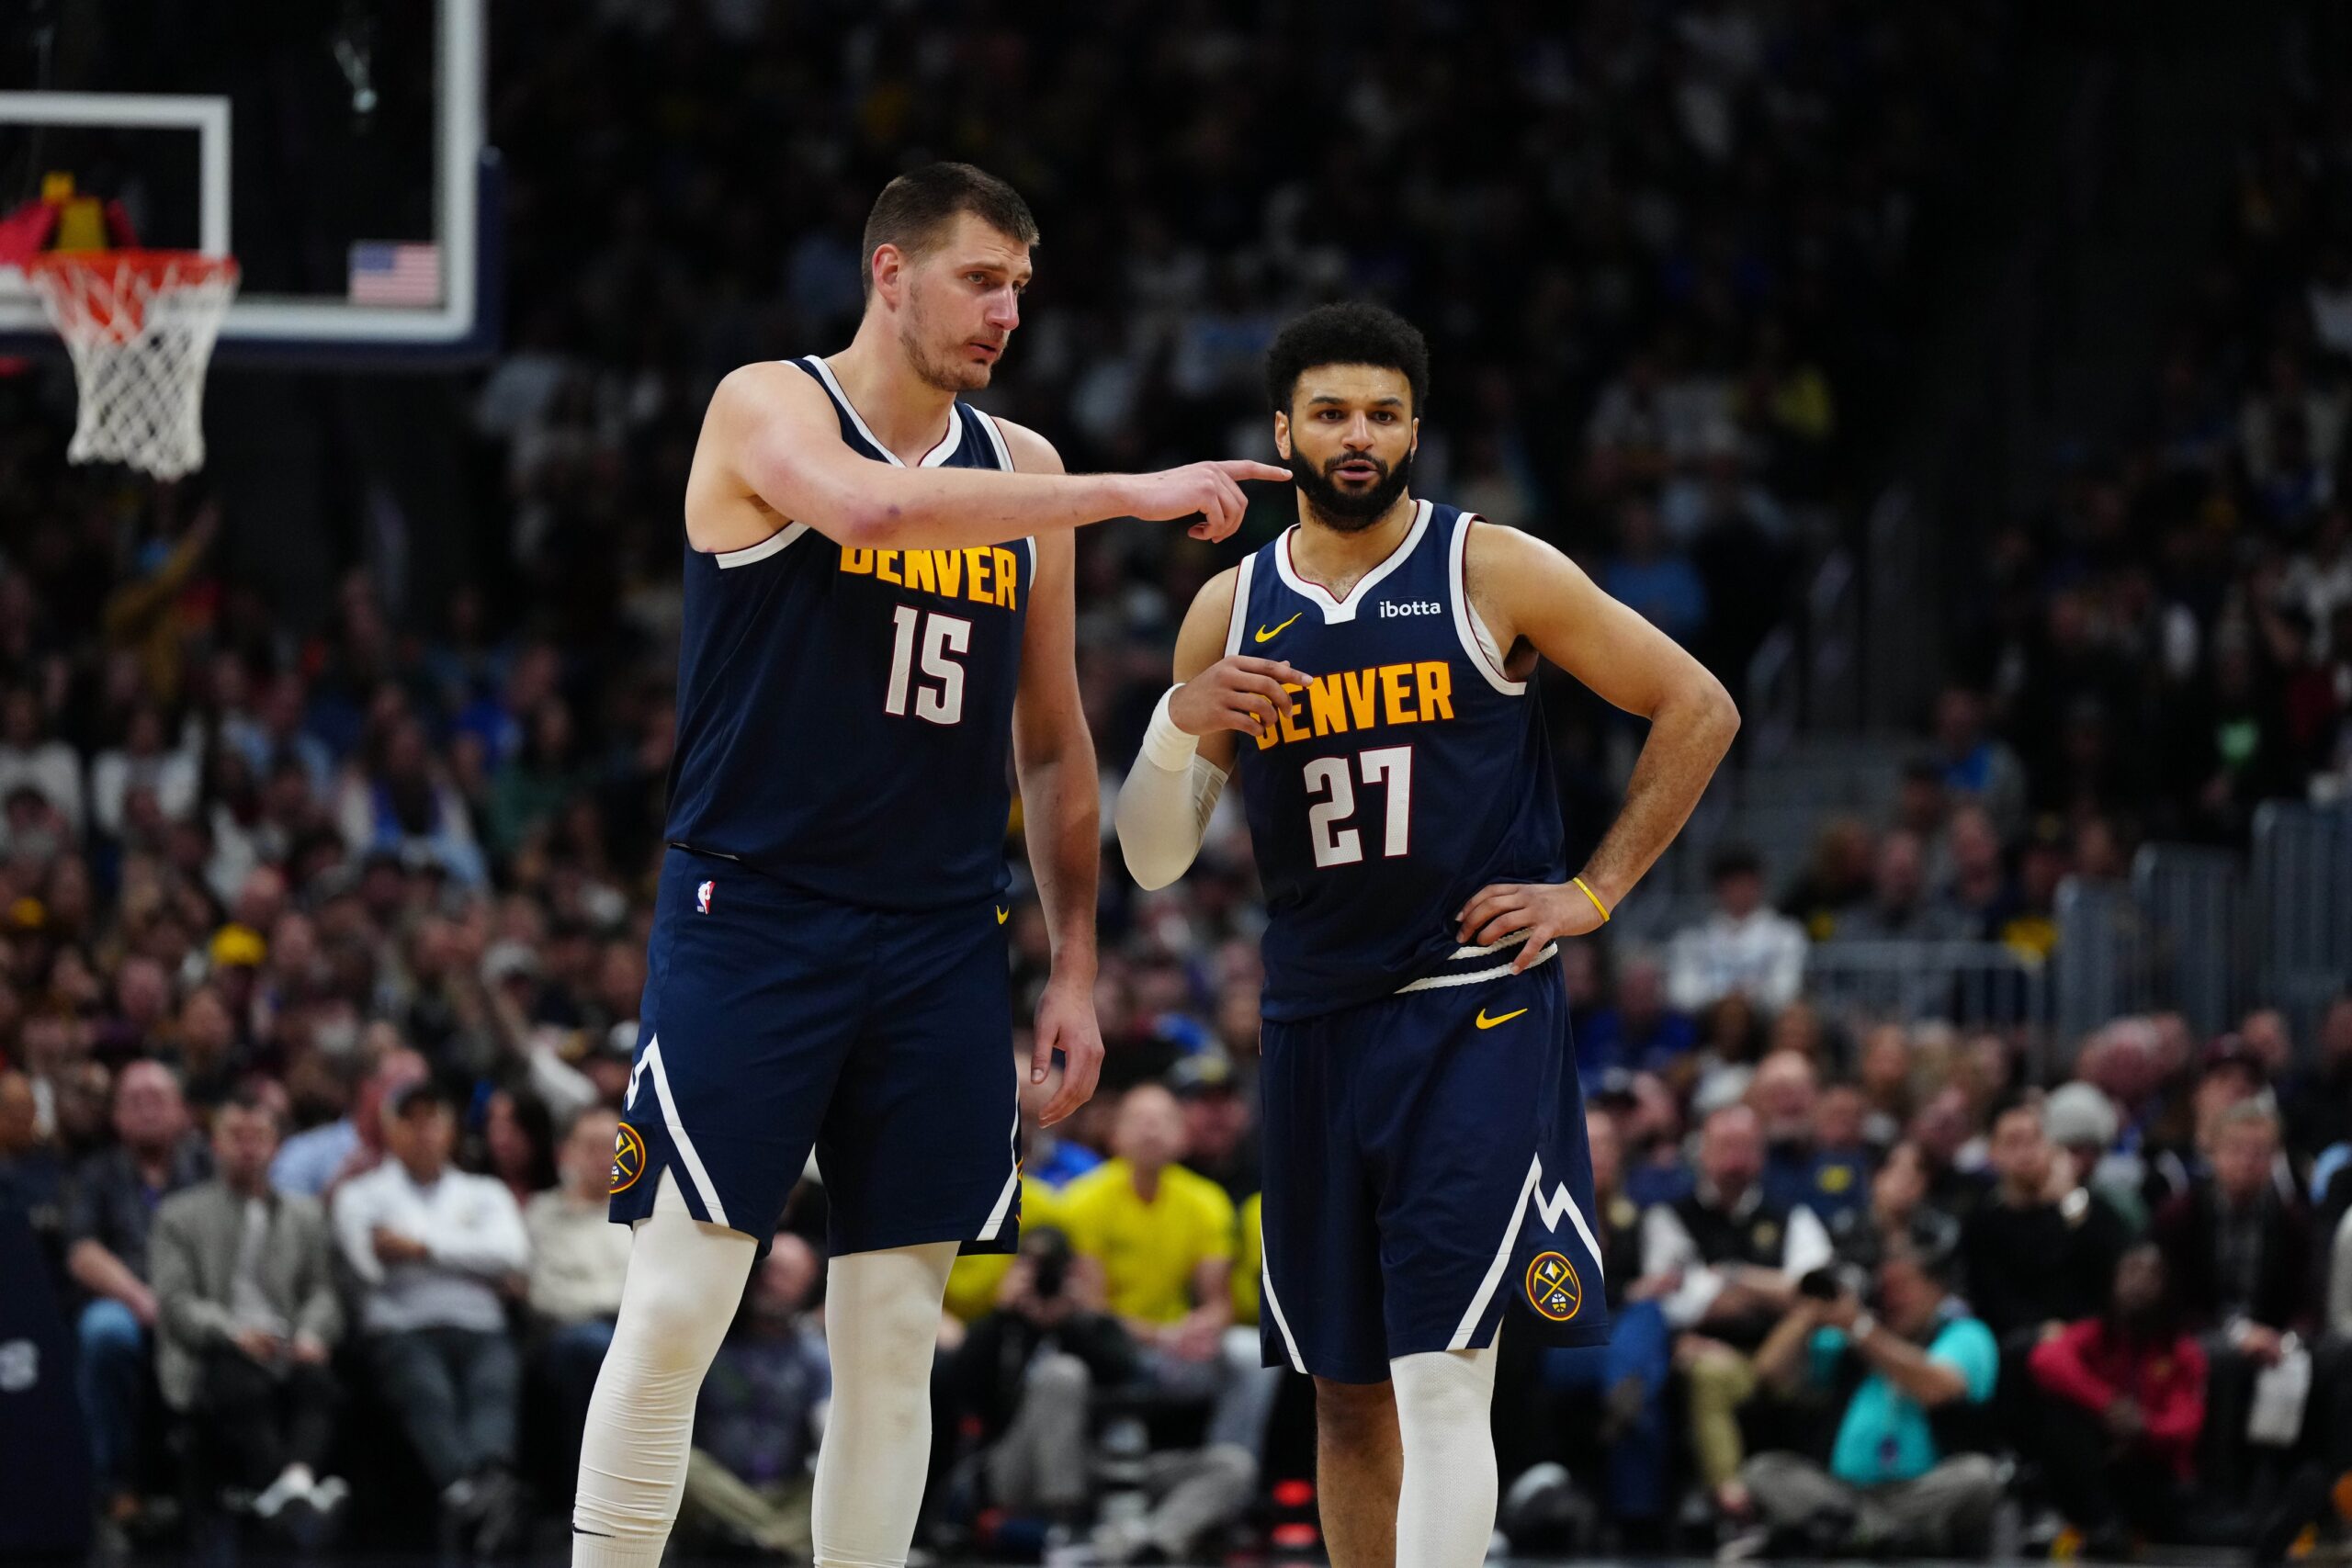 Nikola Jokic and Jamal Murray are important players for the Nuggets title defense.